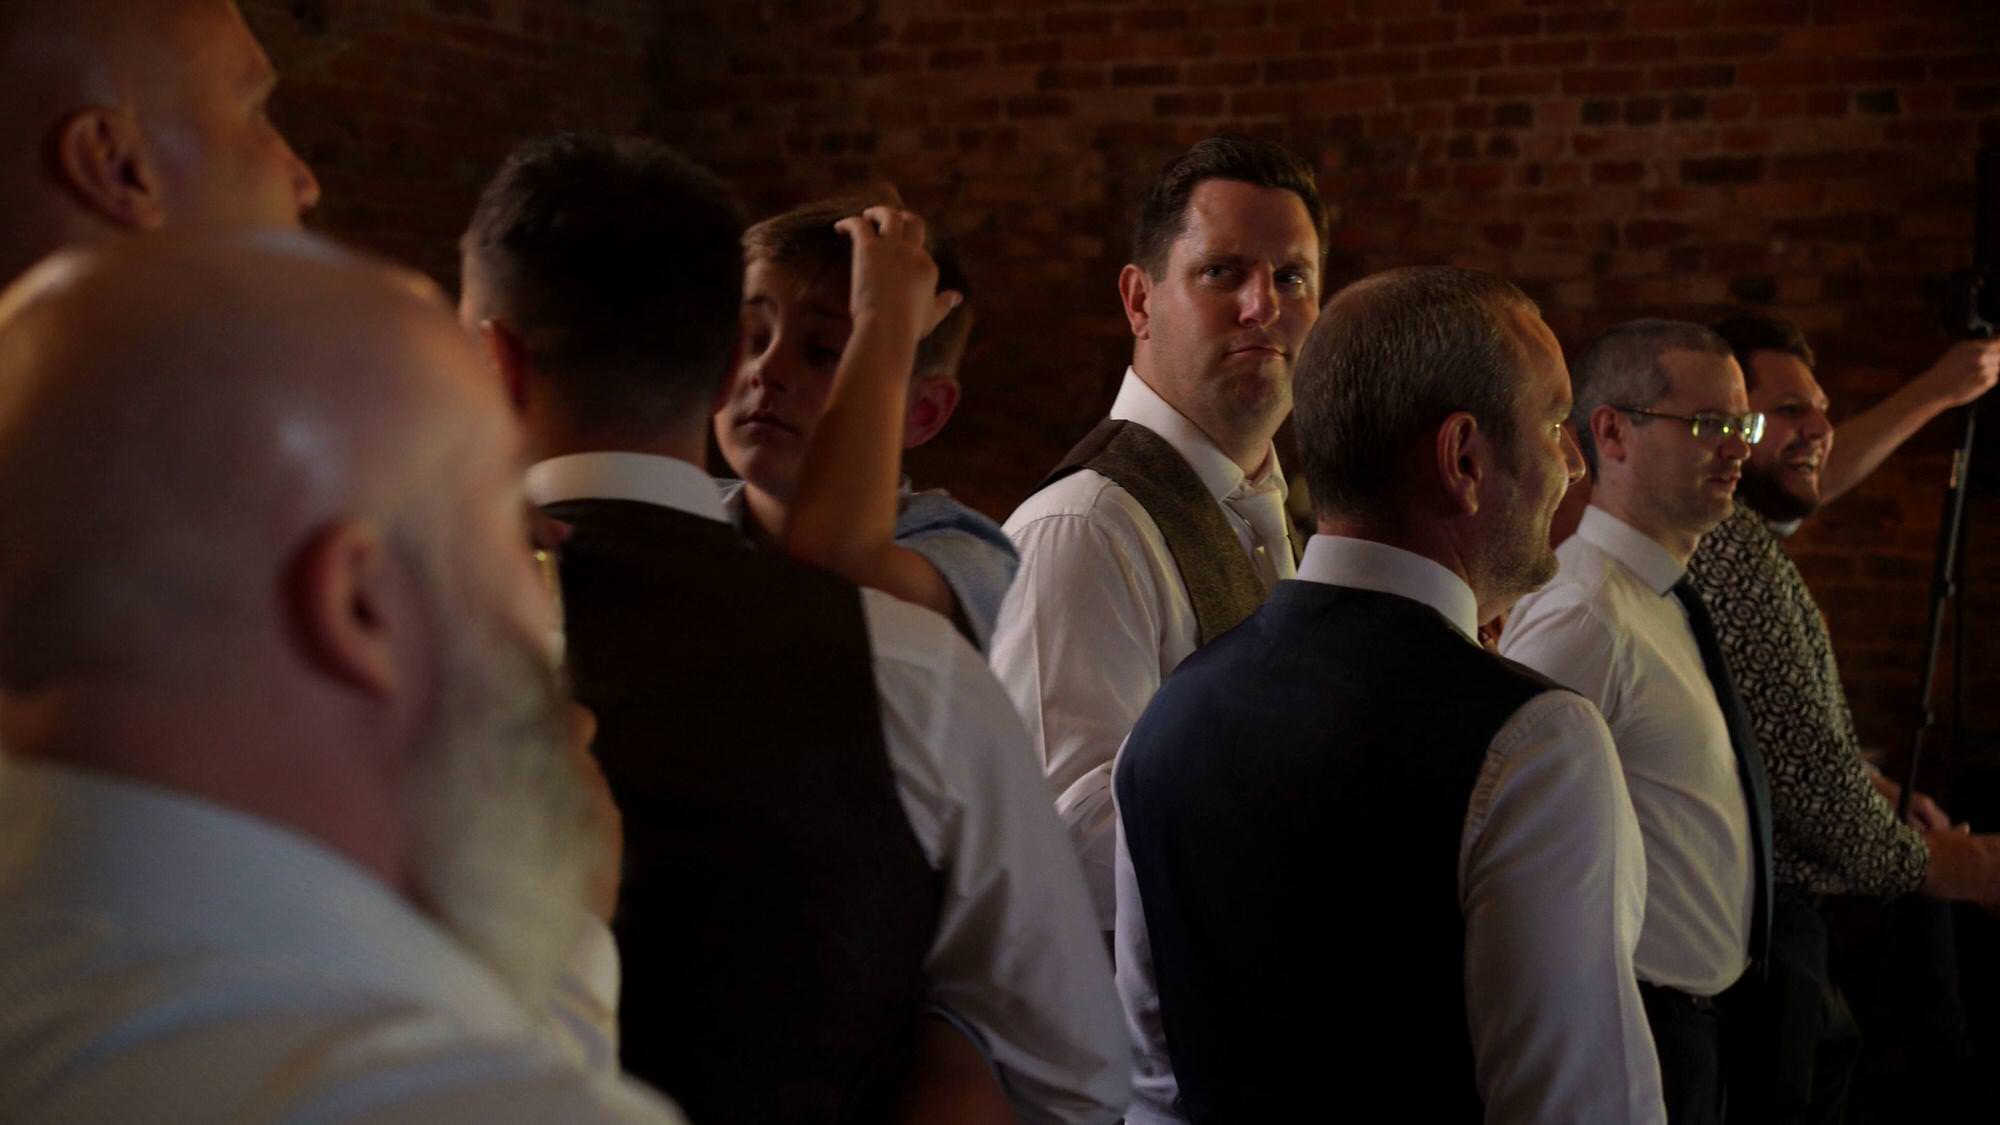 videographer captures a funny face from the groom during dancing